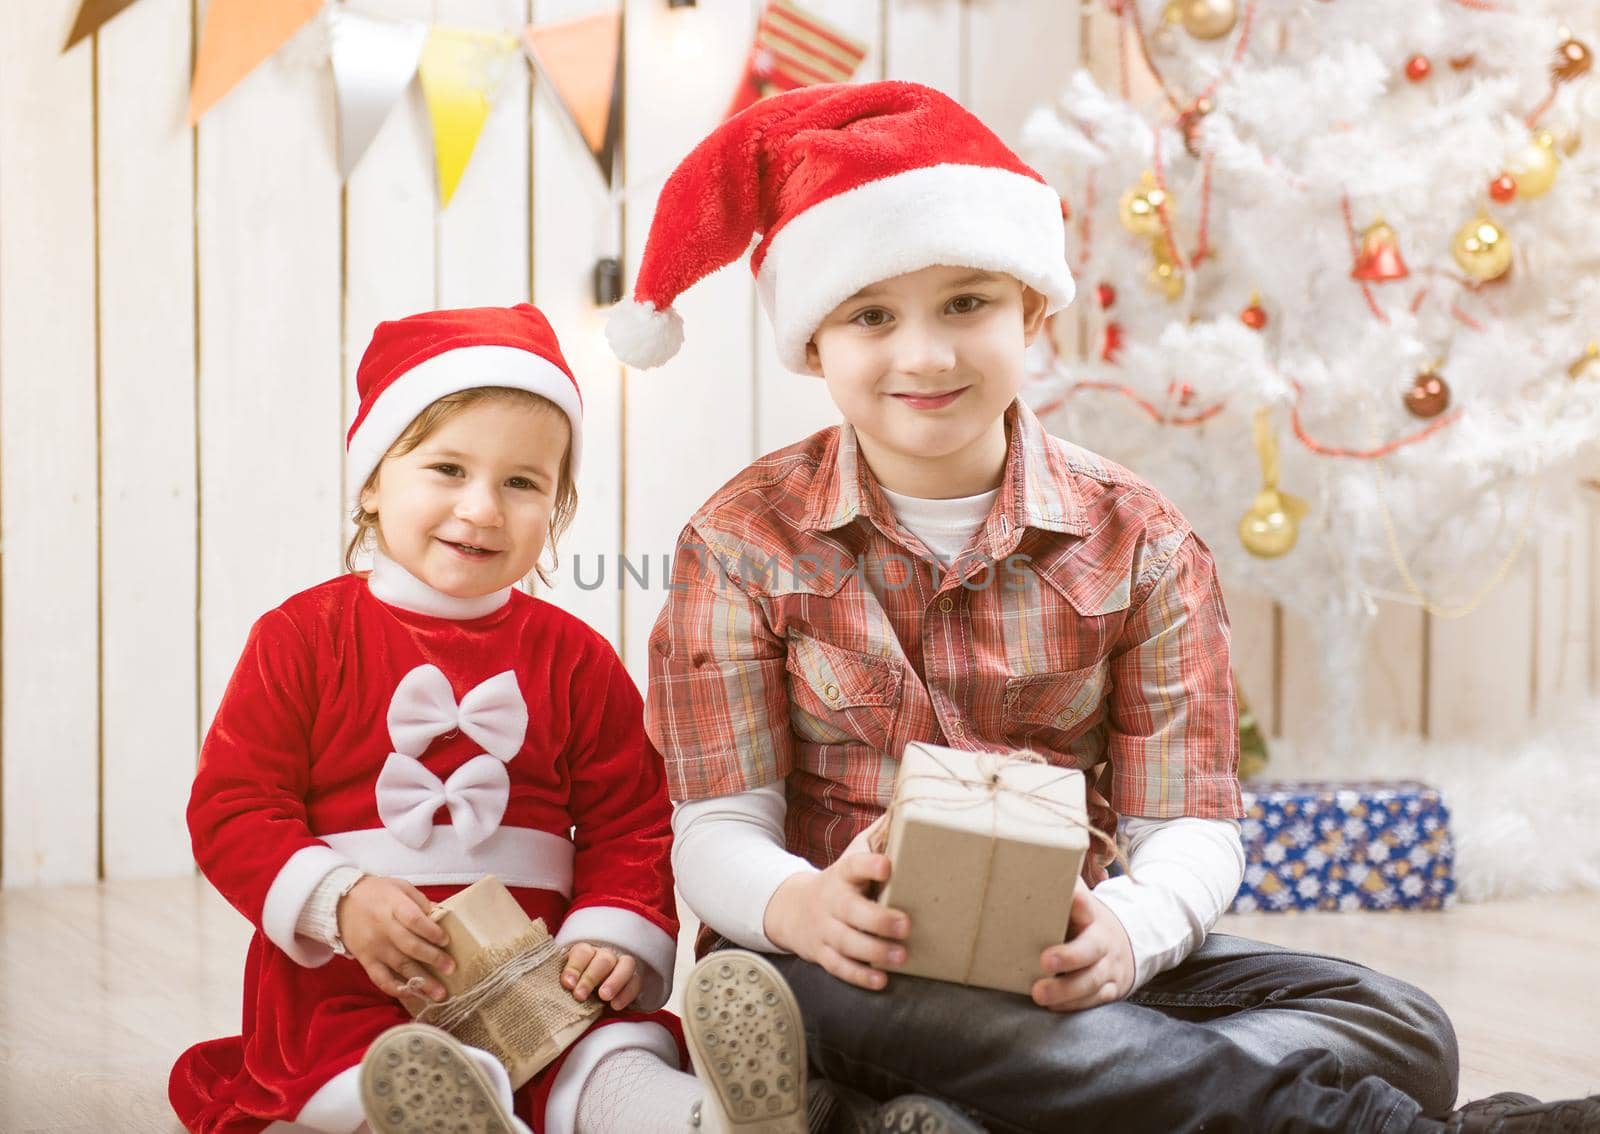 Kids in red santa hats sitting in decorated room with present boxes in hands